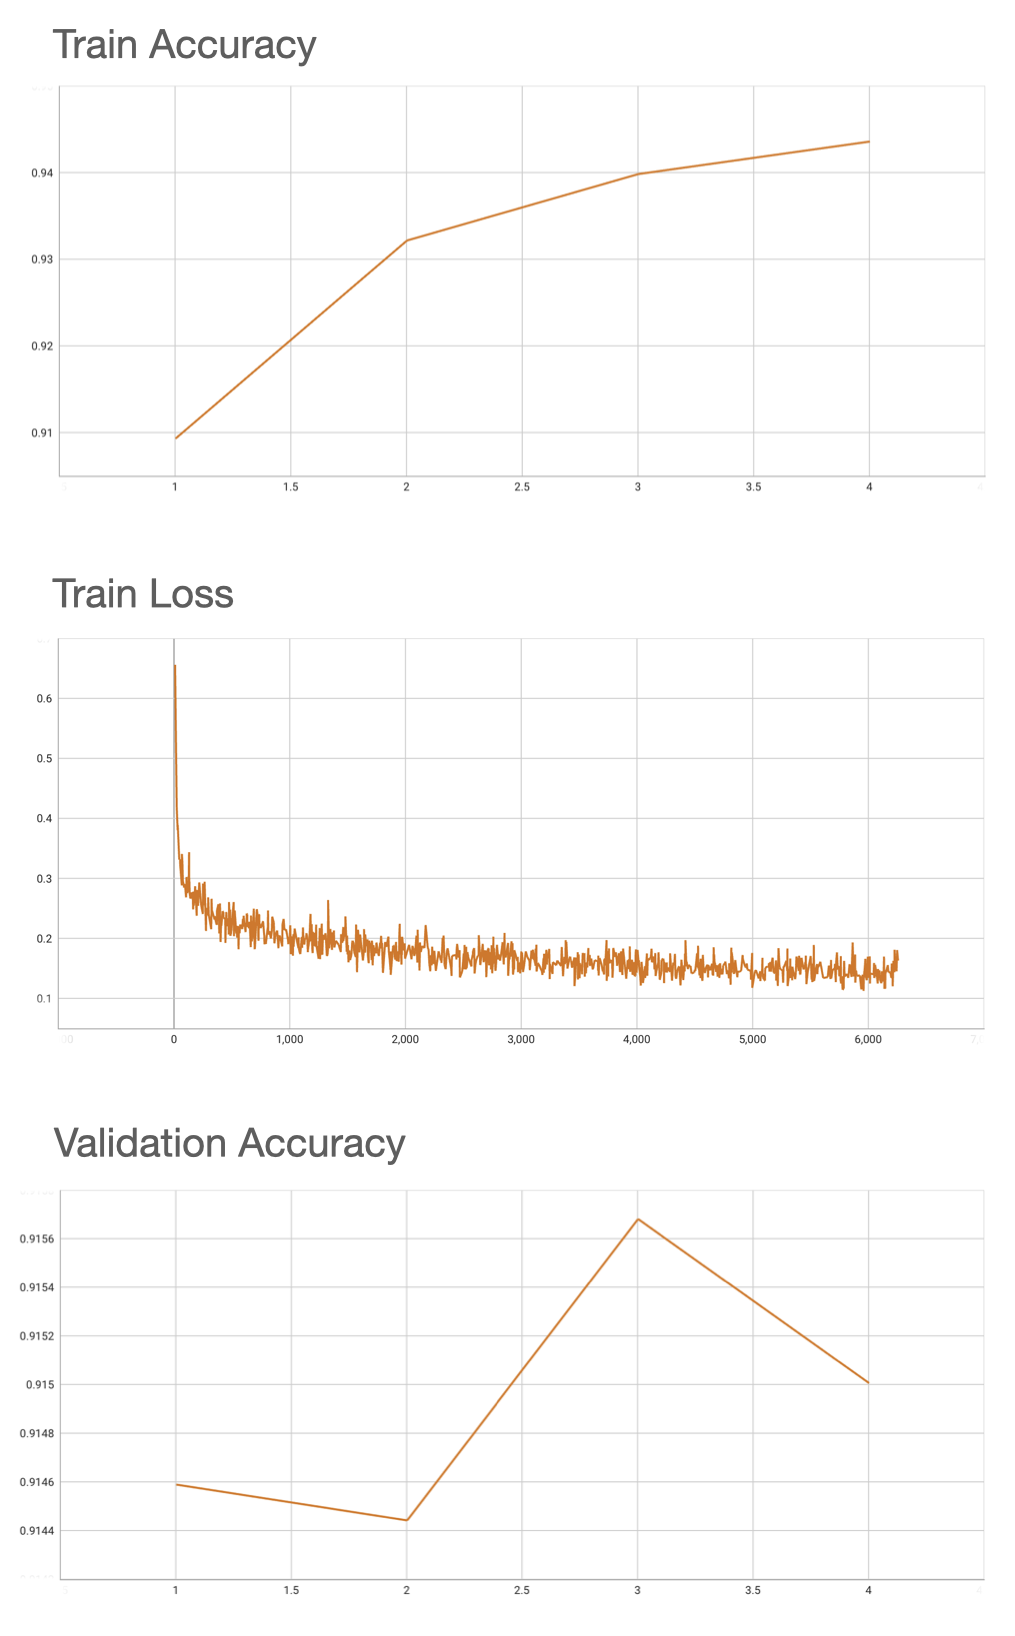 A Graph showing Train Acc, Train Loss, and Validation Acc